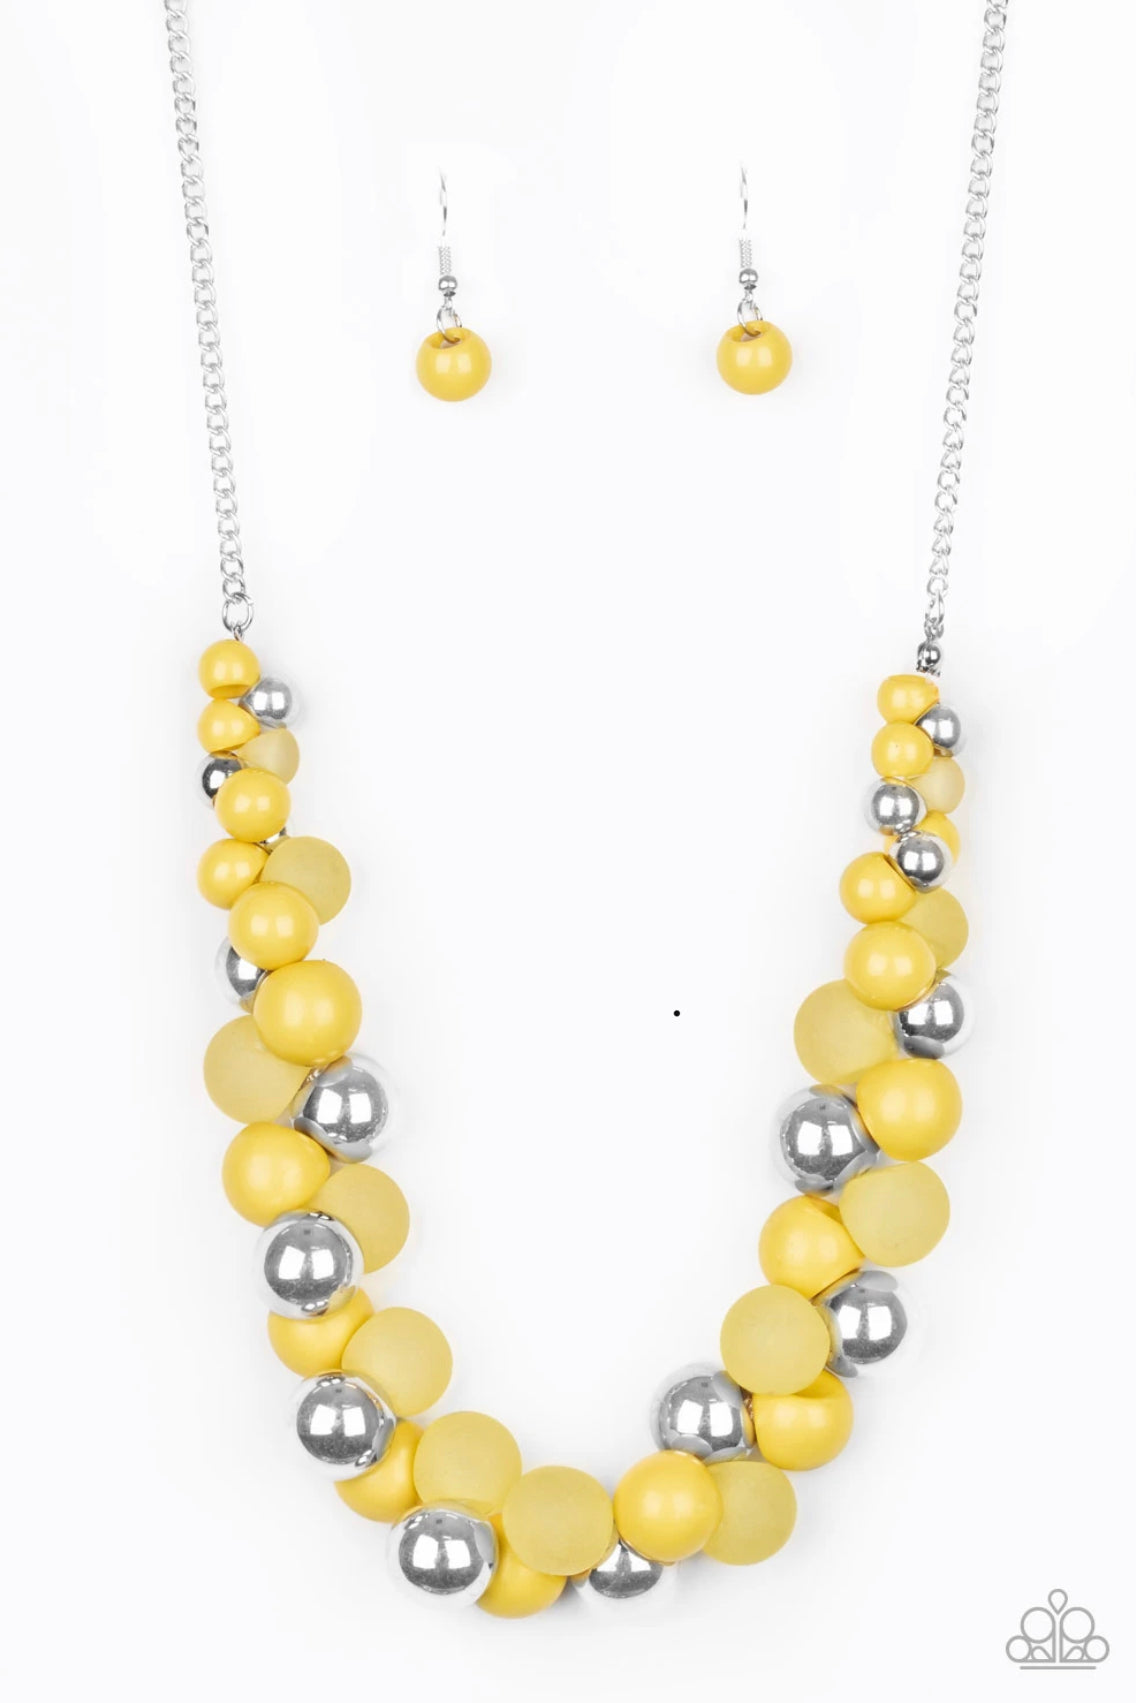 Bubbly Brilliance Necklace - Yellow